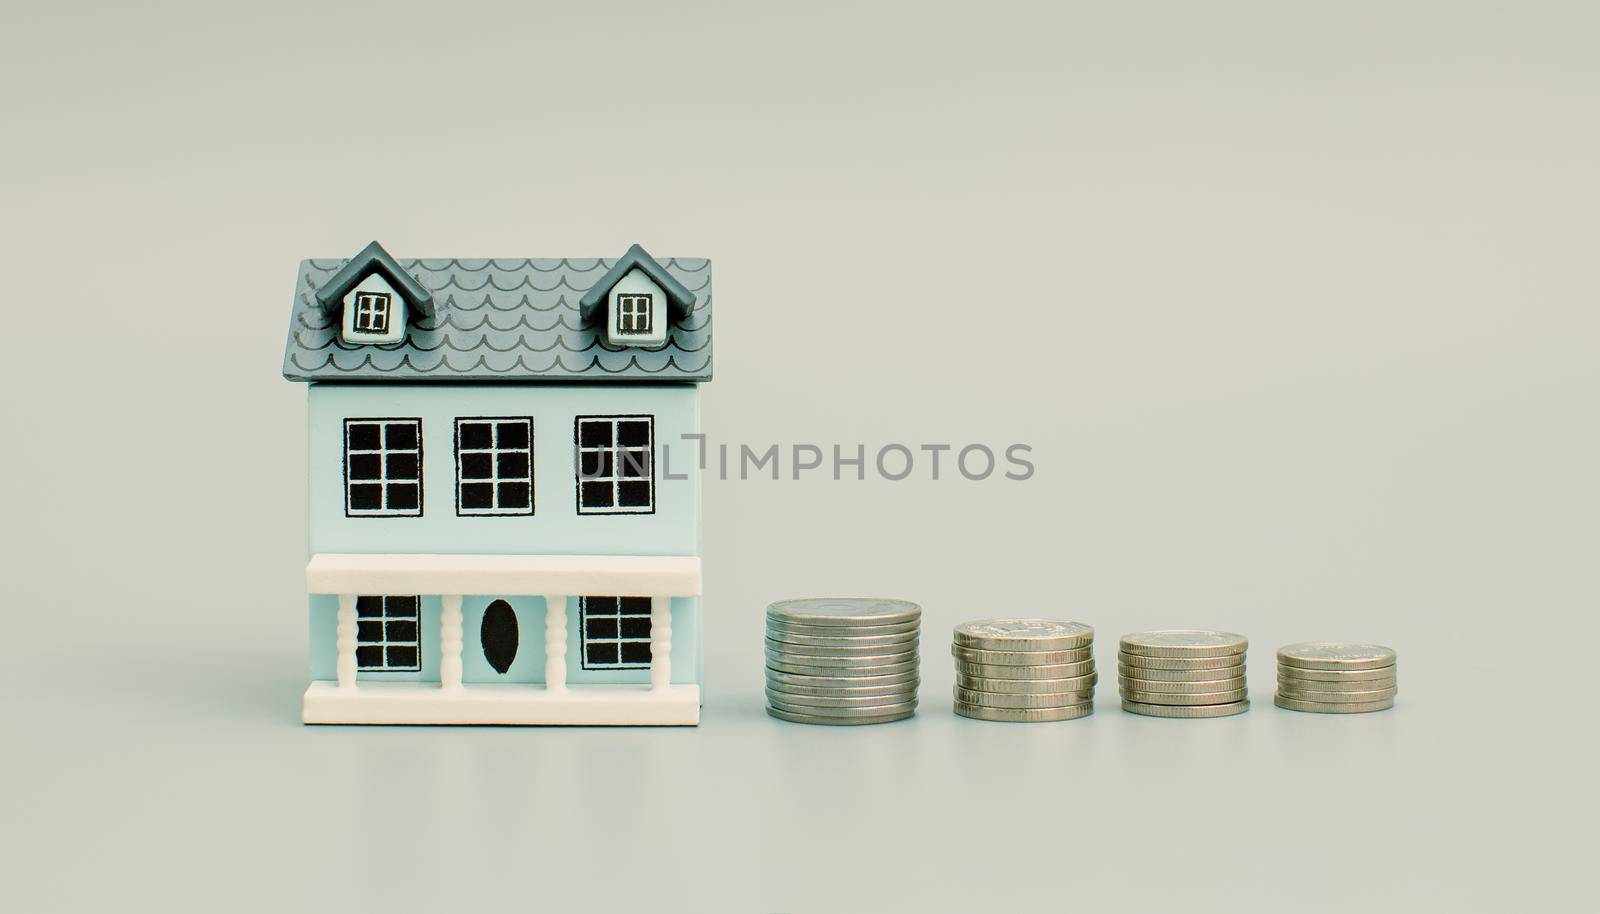 Buy house . Personal financial planning concept . Saving money and financial planning concept by Maximusnd